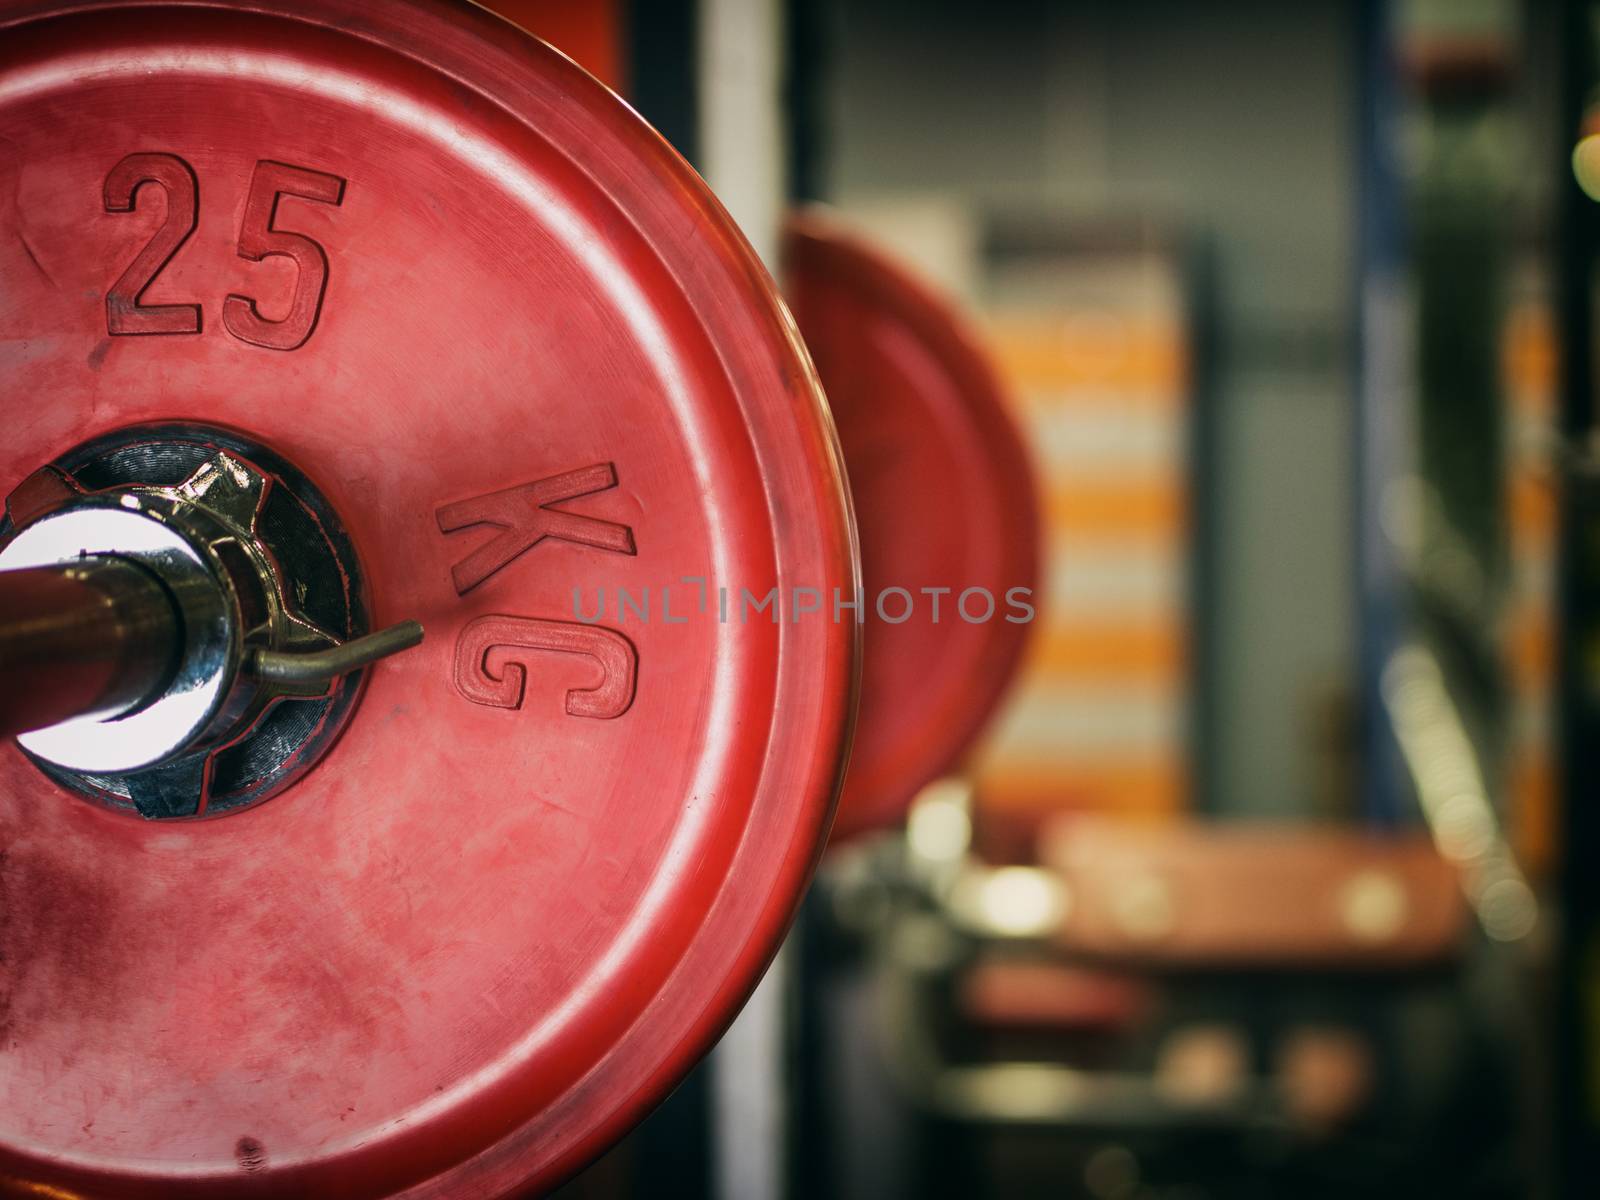 Barbell ready to workout in gym. Shallow DOF. Copy space. Sport or powerlifting background. Toned image.